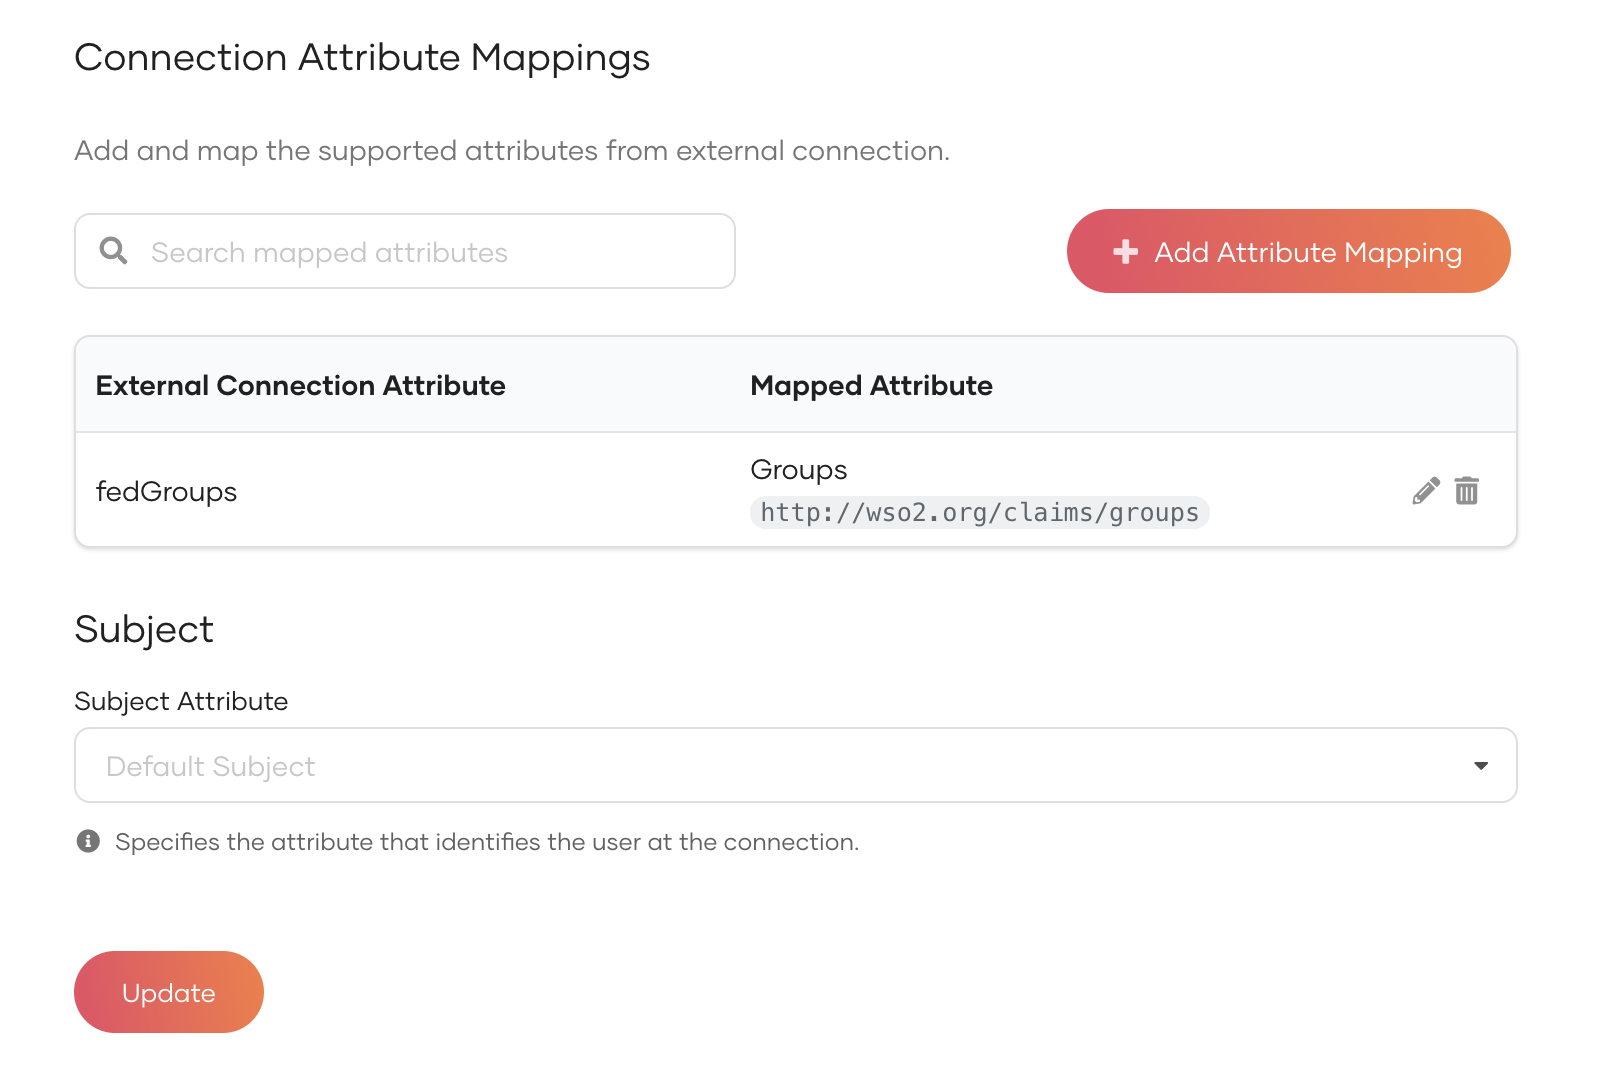 Submit attribute mappings